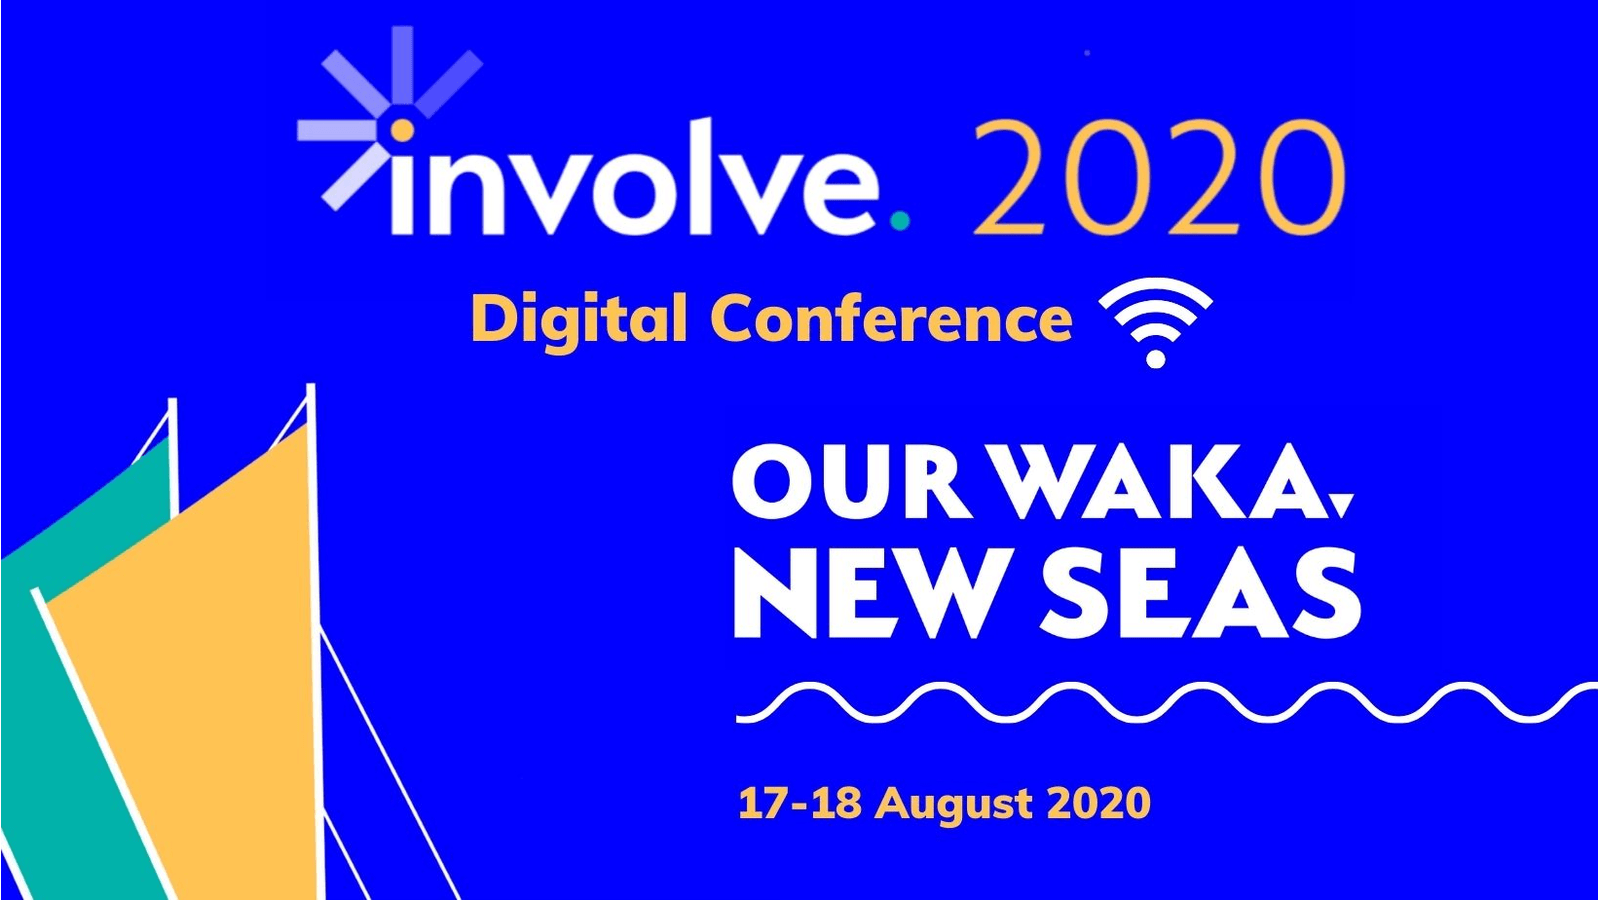 Involve 2020 Digital Conference. Our waka new seas, 17-18 august 2020